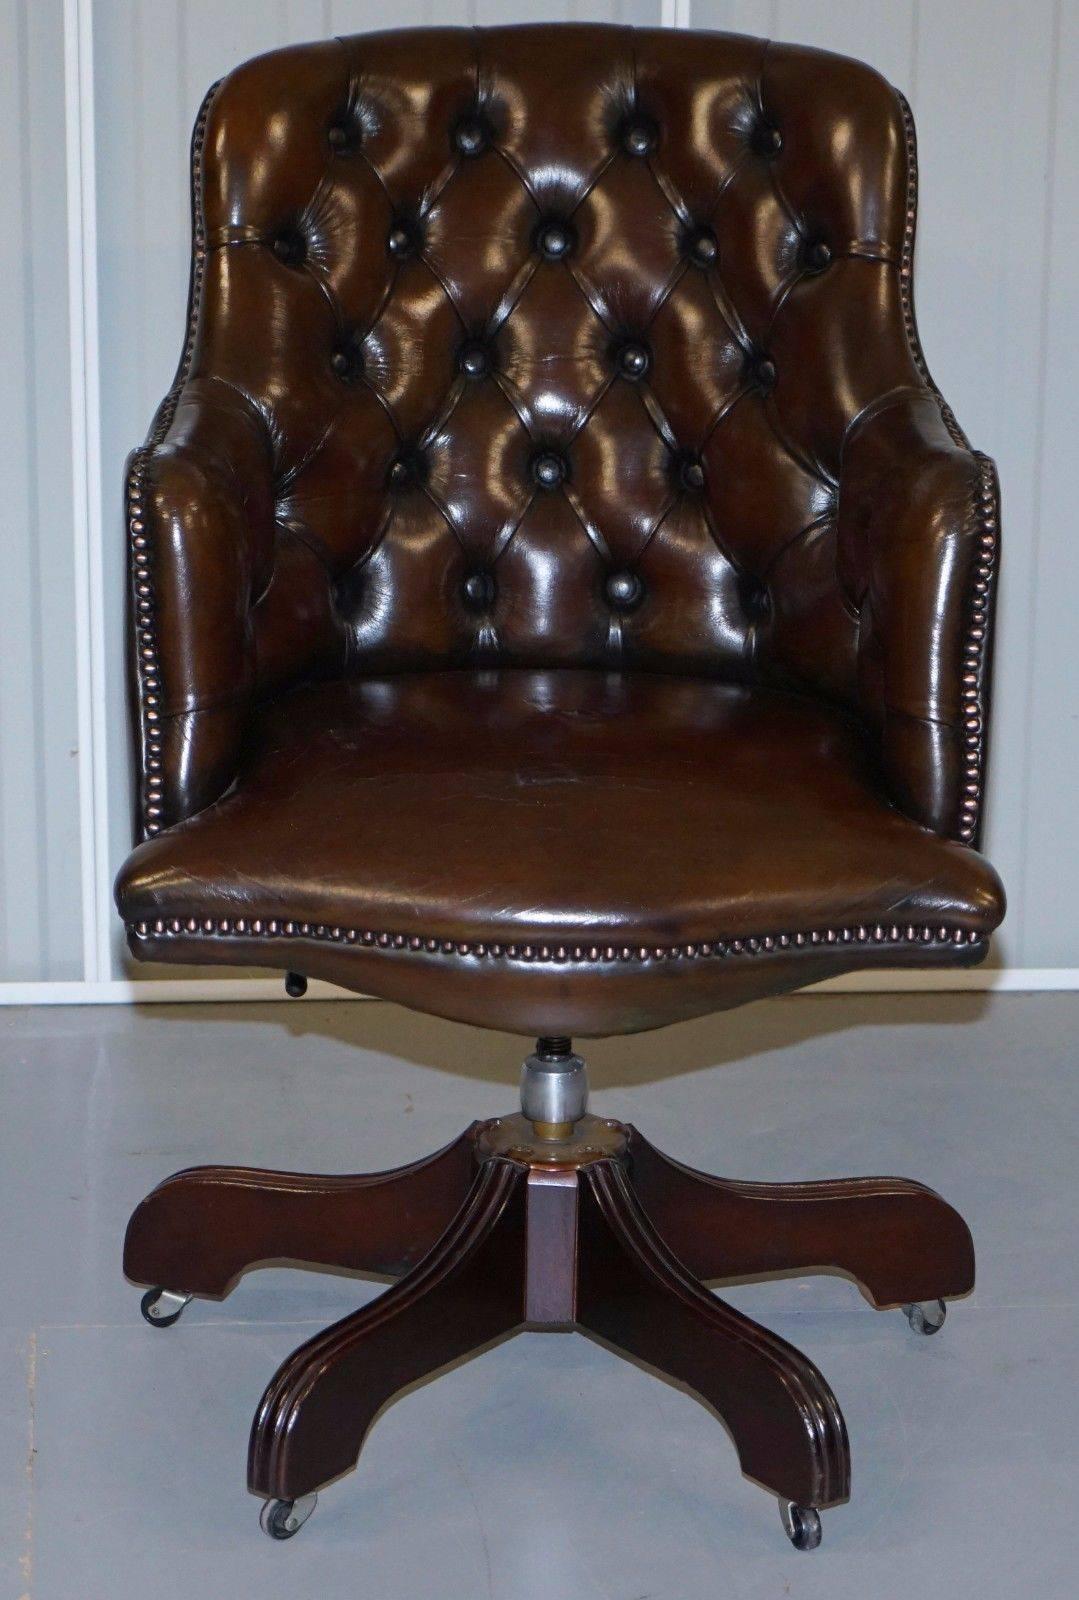 We are delighted to offer for auction this lovely fully restored hand dyed cigar brown leather barrel back Chesterfield captain’s chair

This piece has been fully restored to include having the leather stripped back then hand dyed this stunning